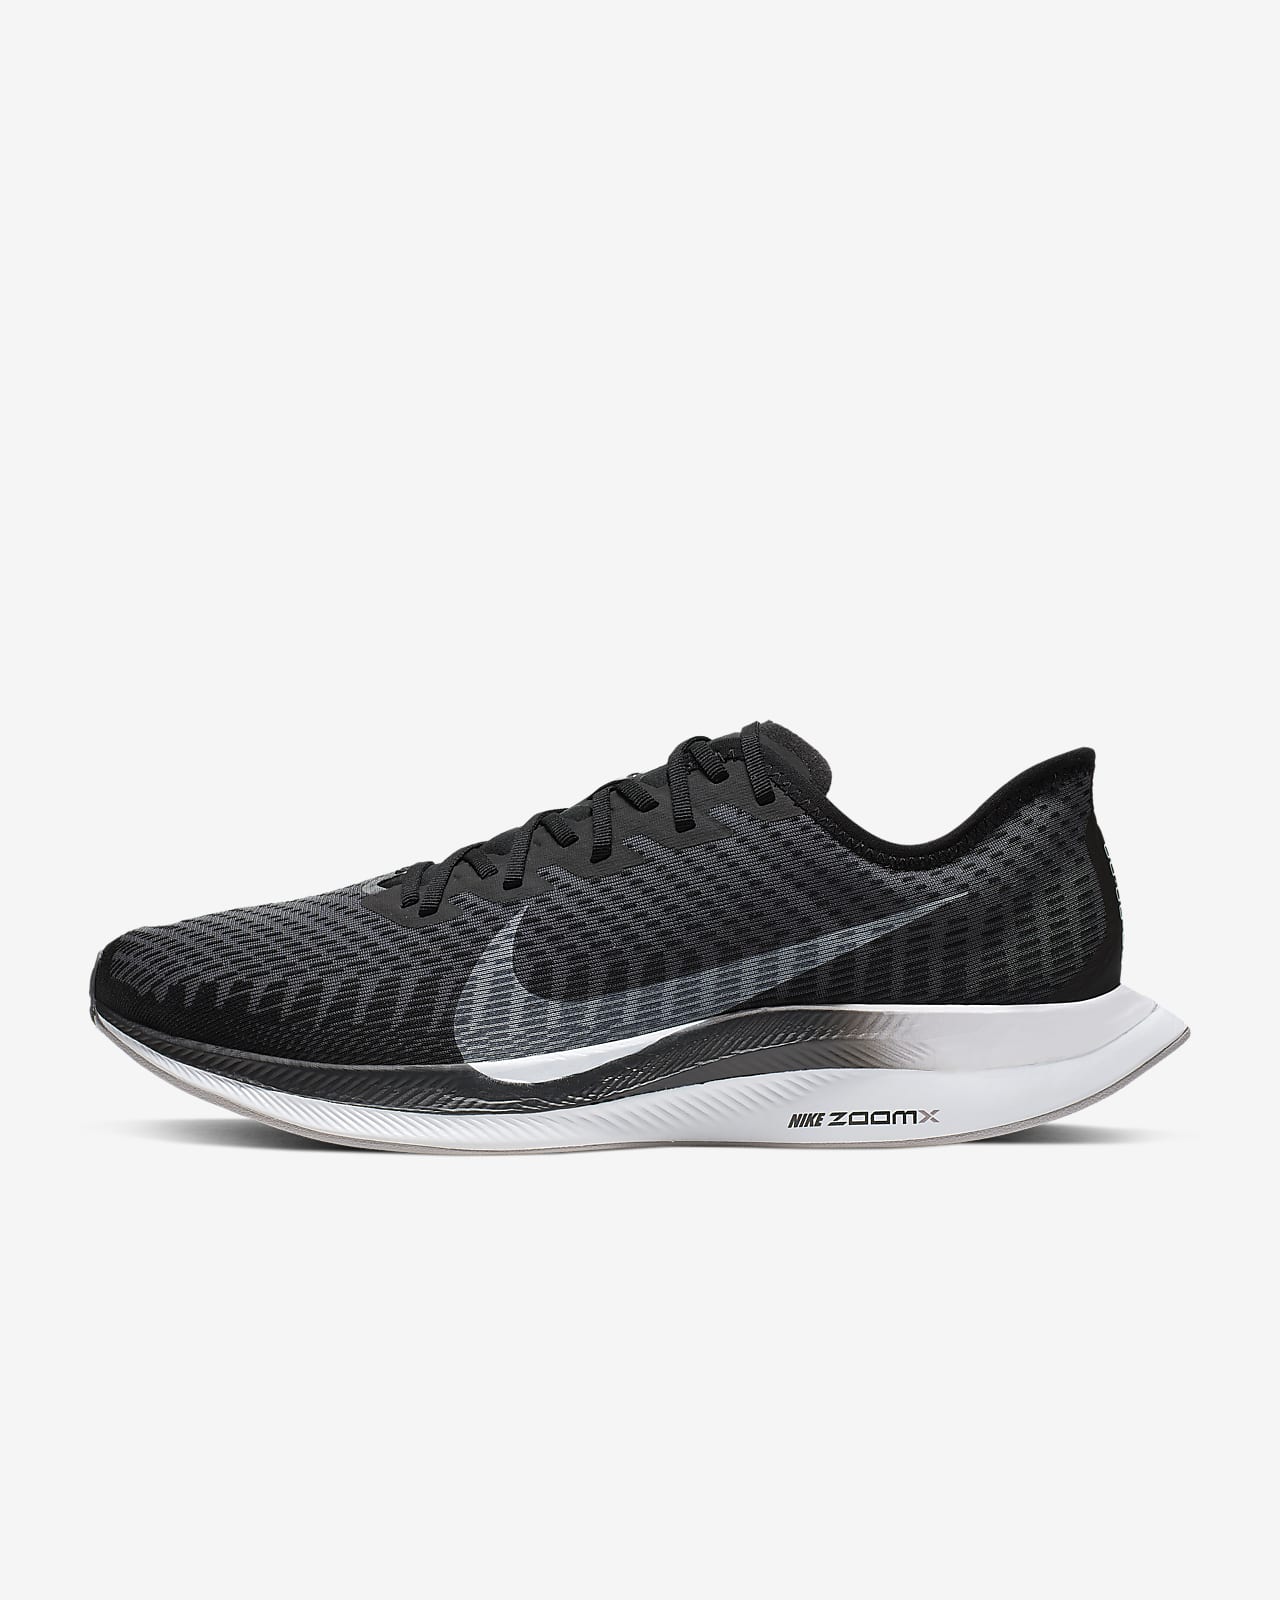 Air Zoom Pegasus Turbo 2 Factory Sale, UP TO 66% OFF | www ... افضل حبوب زنك